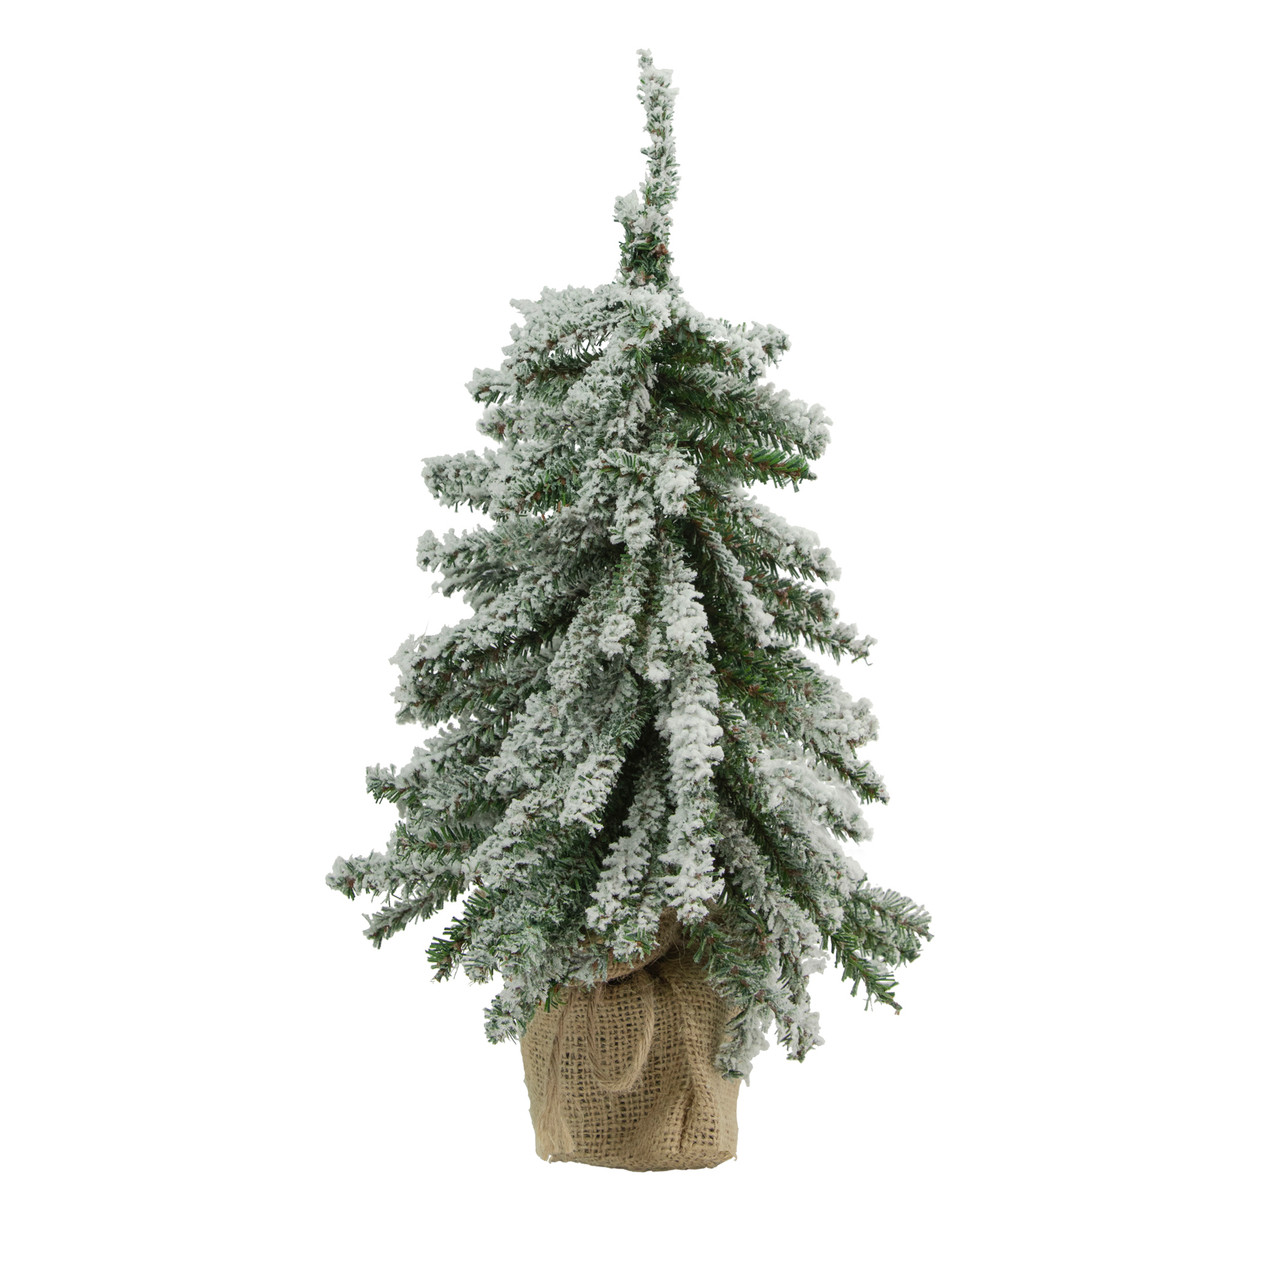  Northlight 4' PVC Flocked Angel Pine Artificial Christmas Tree  - Unlit, Green : Home & Kitchen